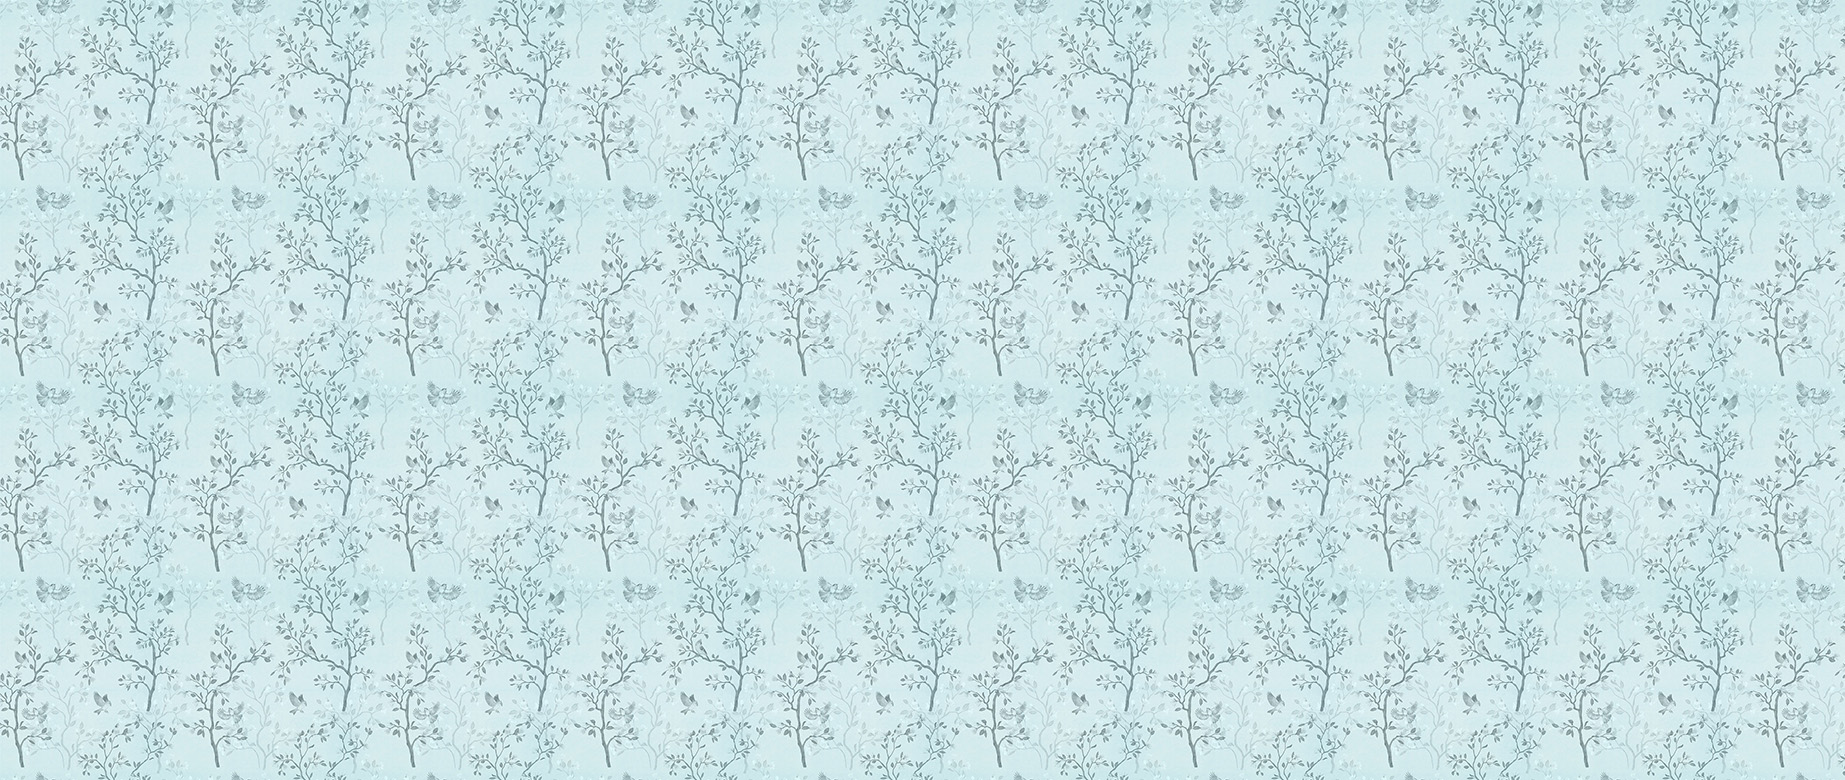 magnolia-tree-pattern-in-blue-wallpapers-full-wide-view